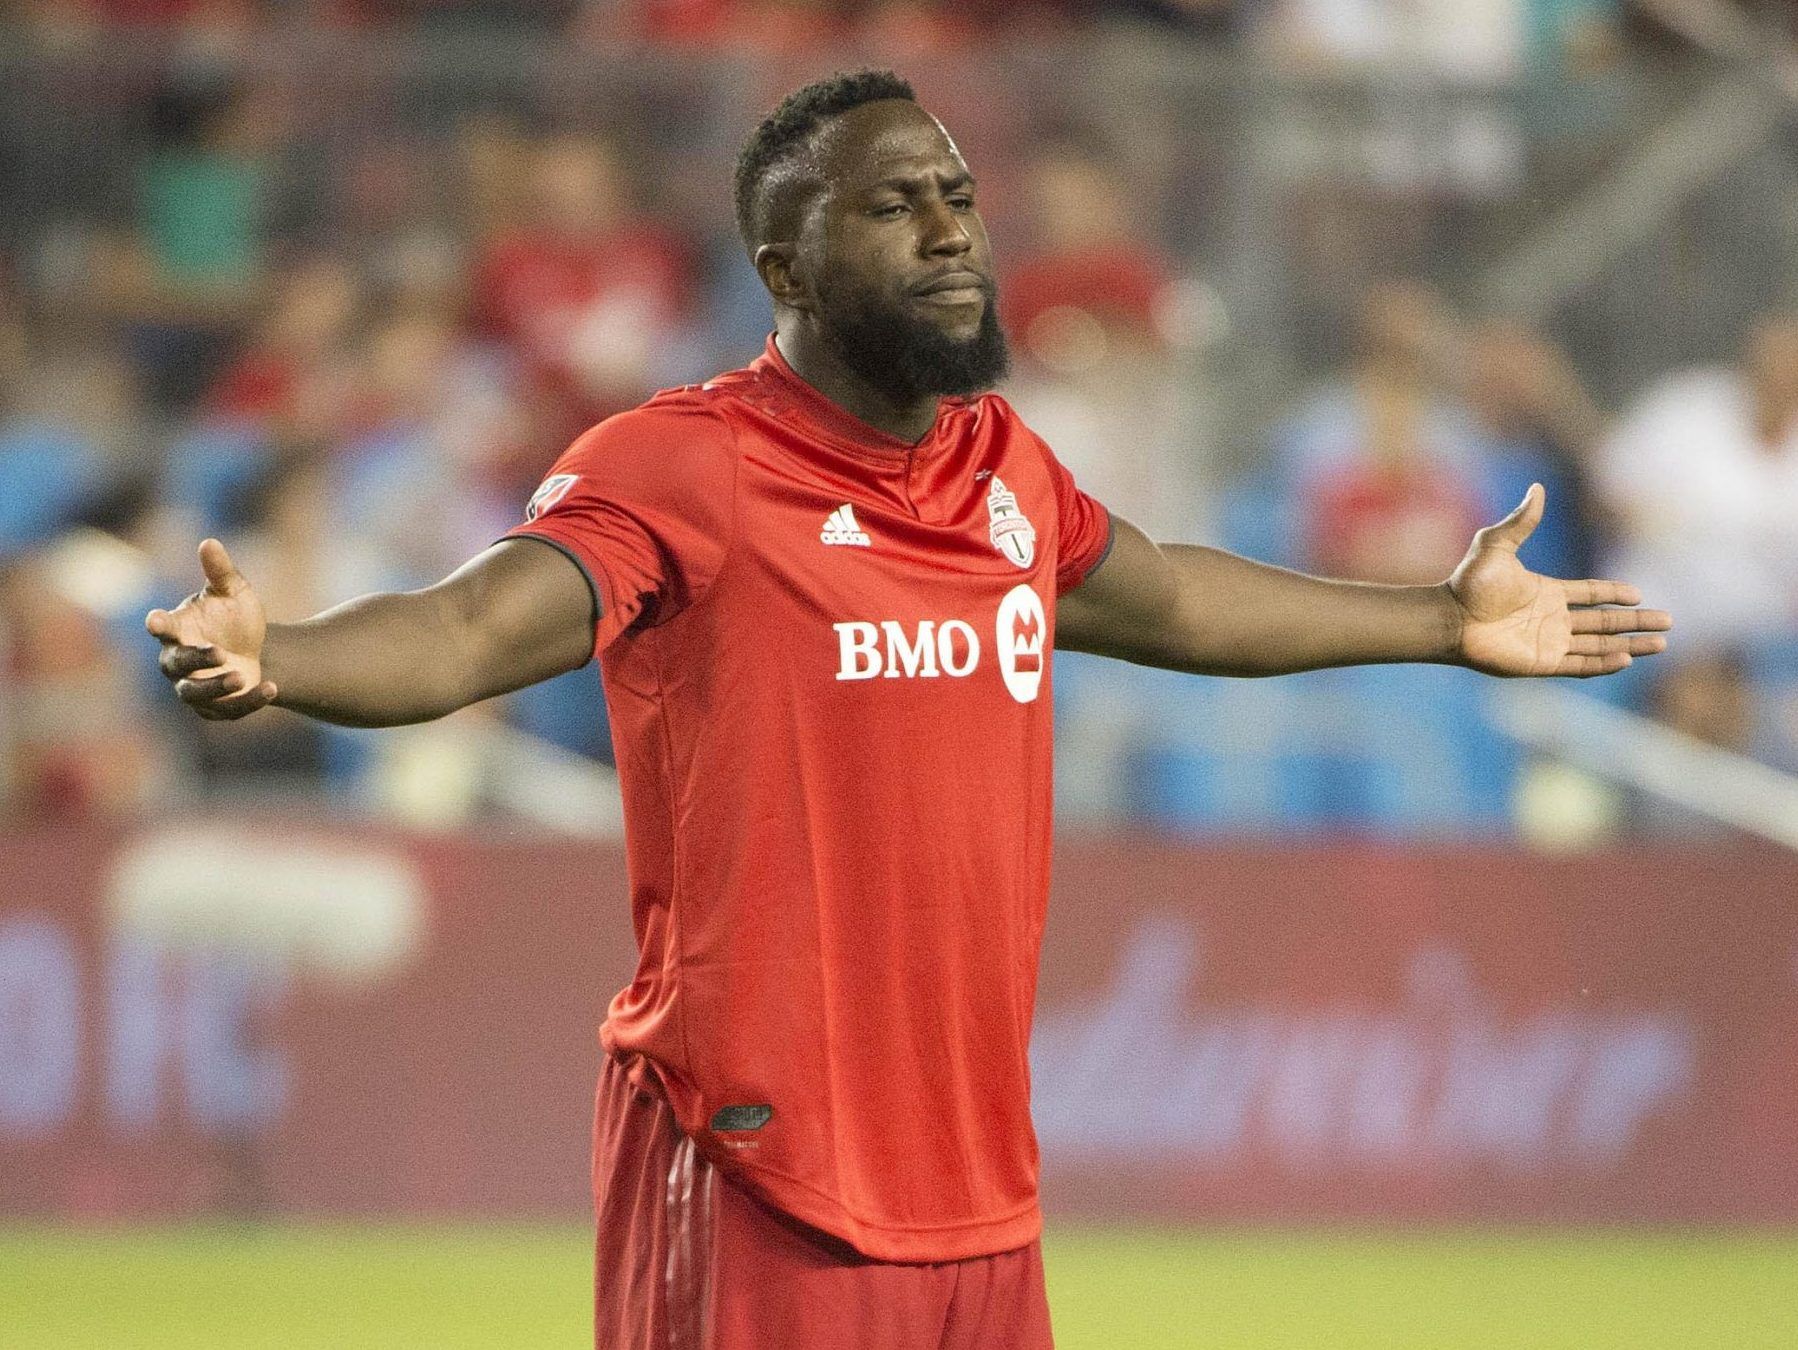 Altidore's move to the New England Revolution